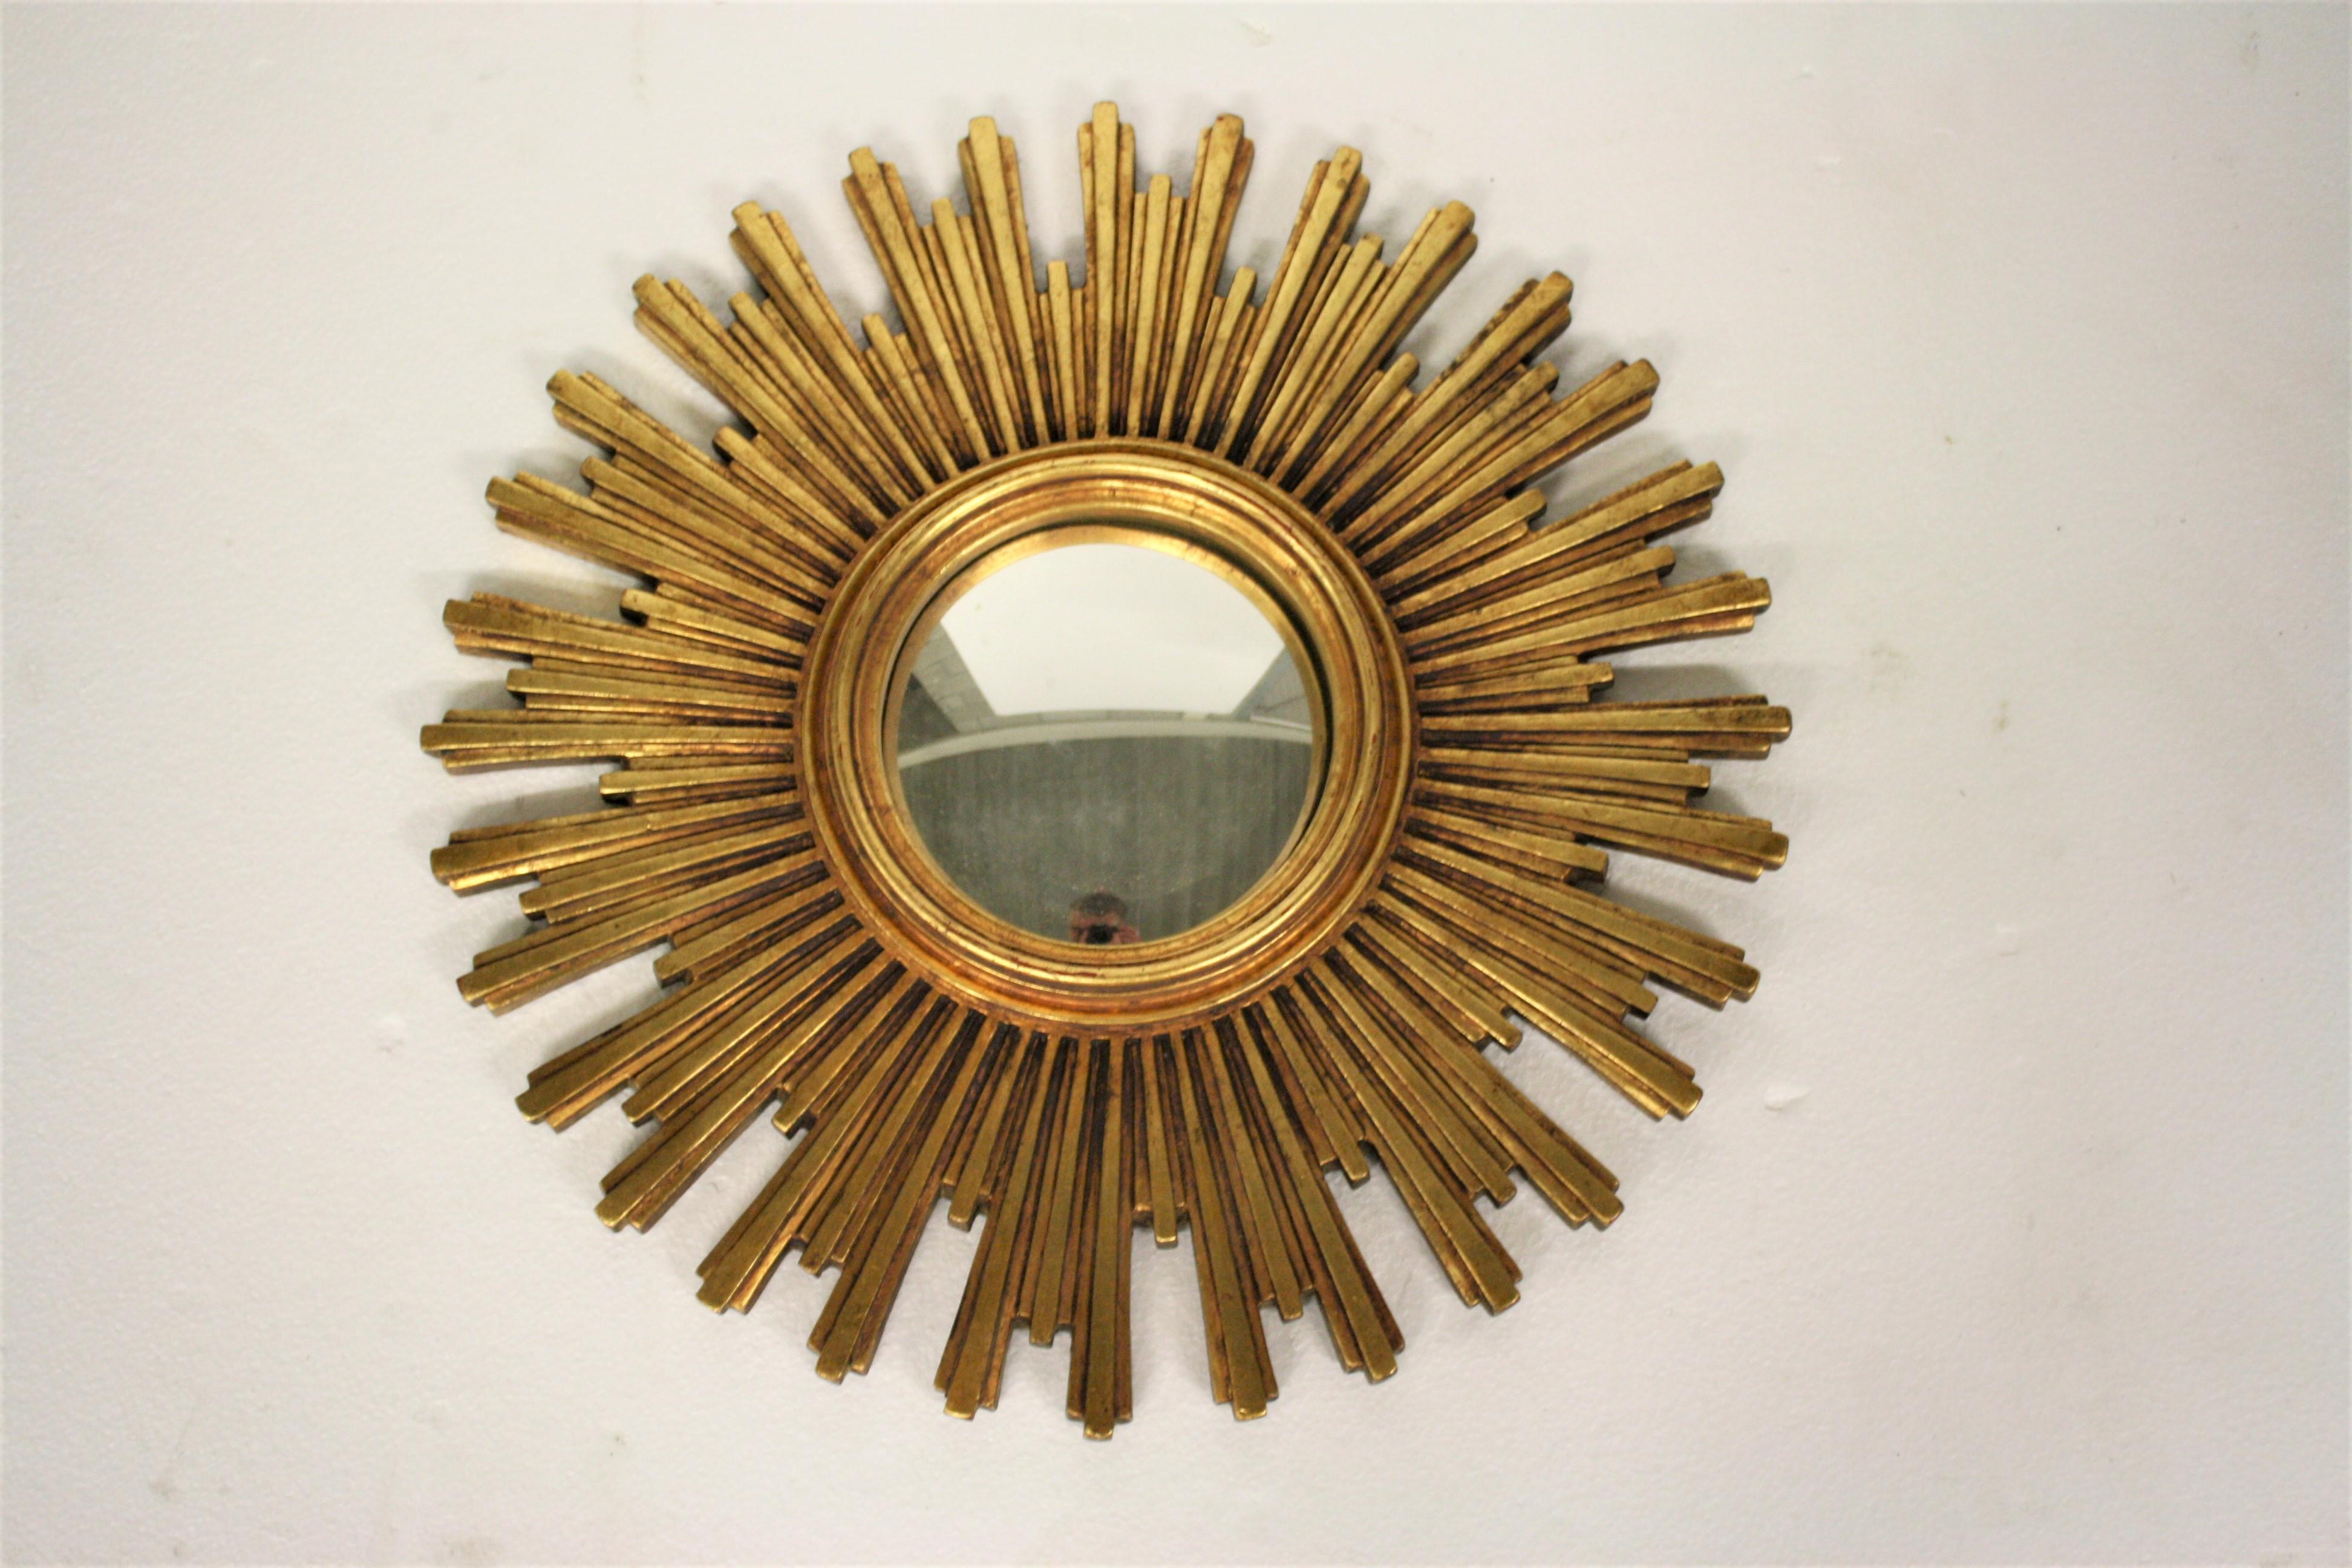 Heavy gilded resin sunburst mirror with convex mirror glass.

The golden mirror is in a very good condition.

Made in Belgium, 1960s.

Dimensions:
Diameter 56.5cm/22.04